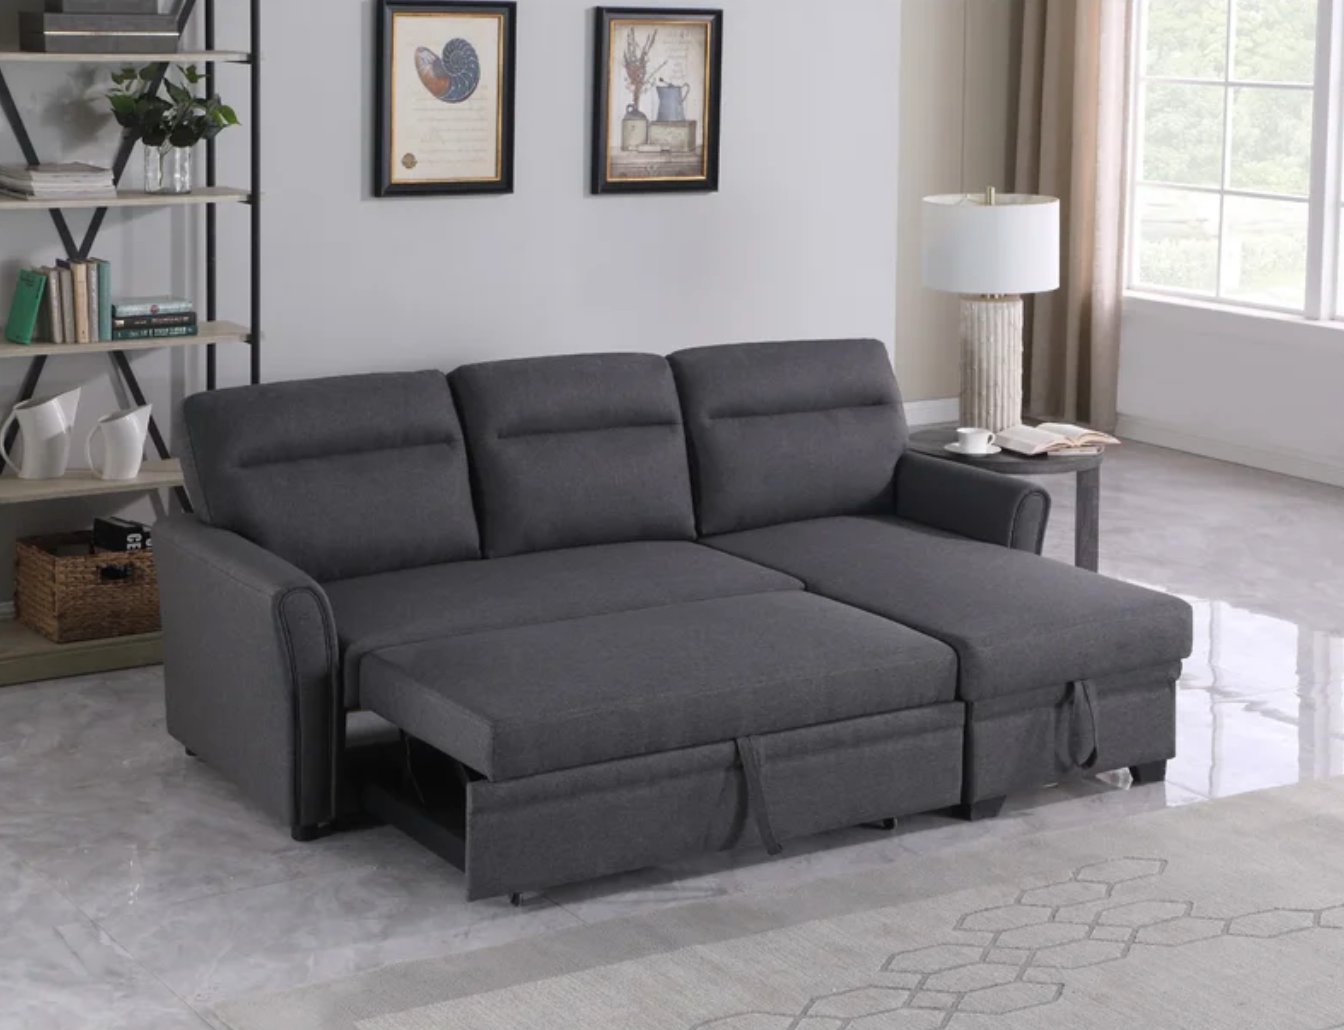 83" Wide Reversible Sofa & Chaise